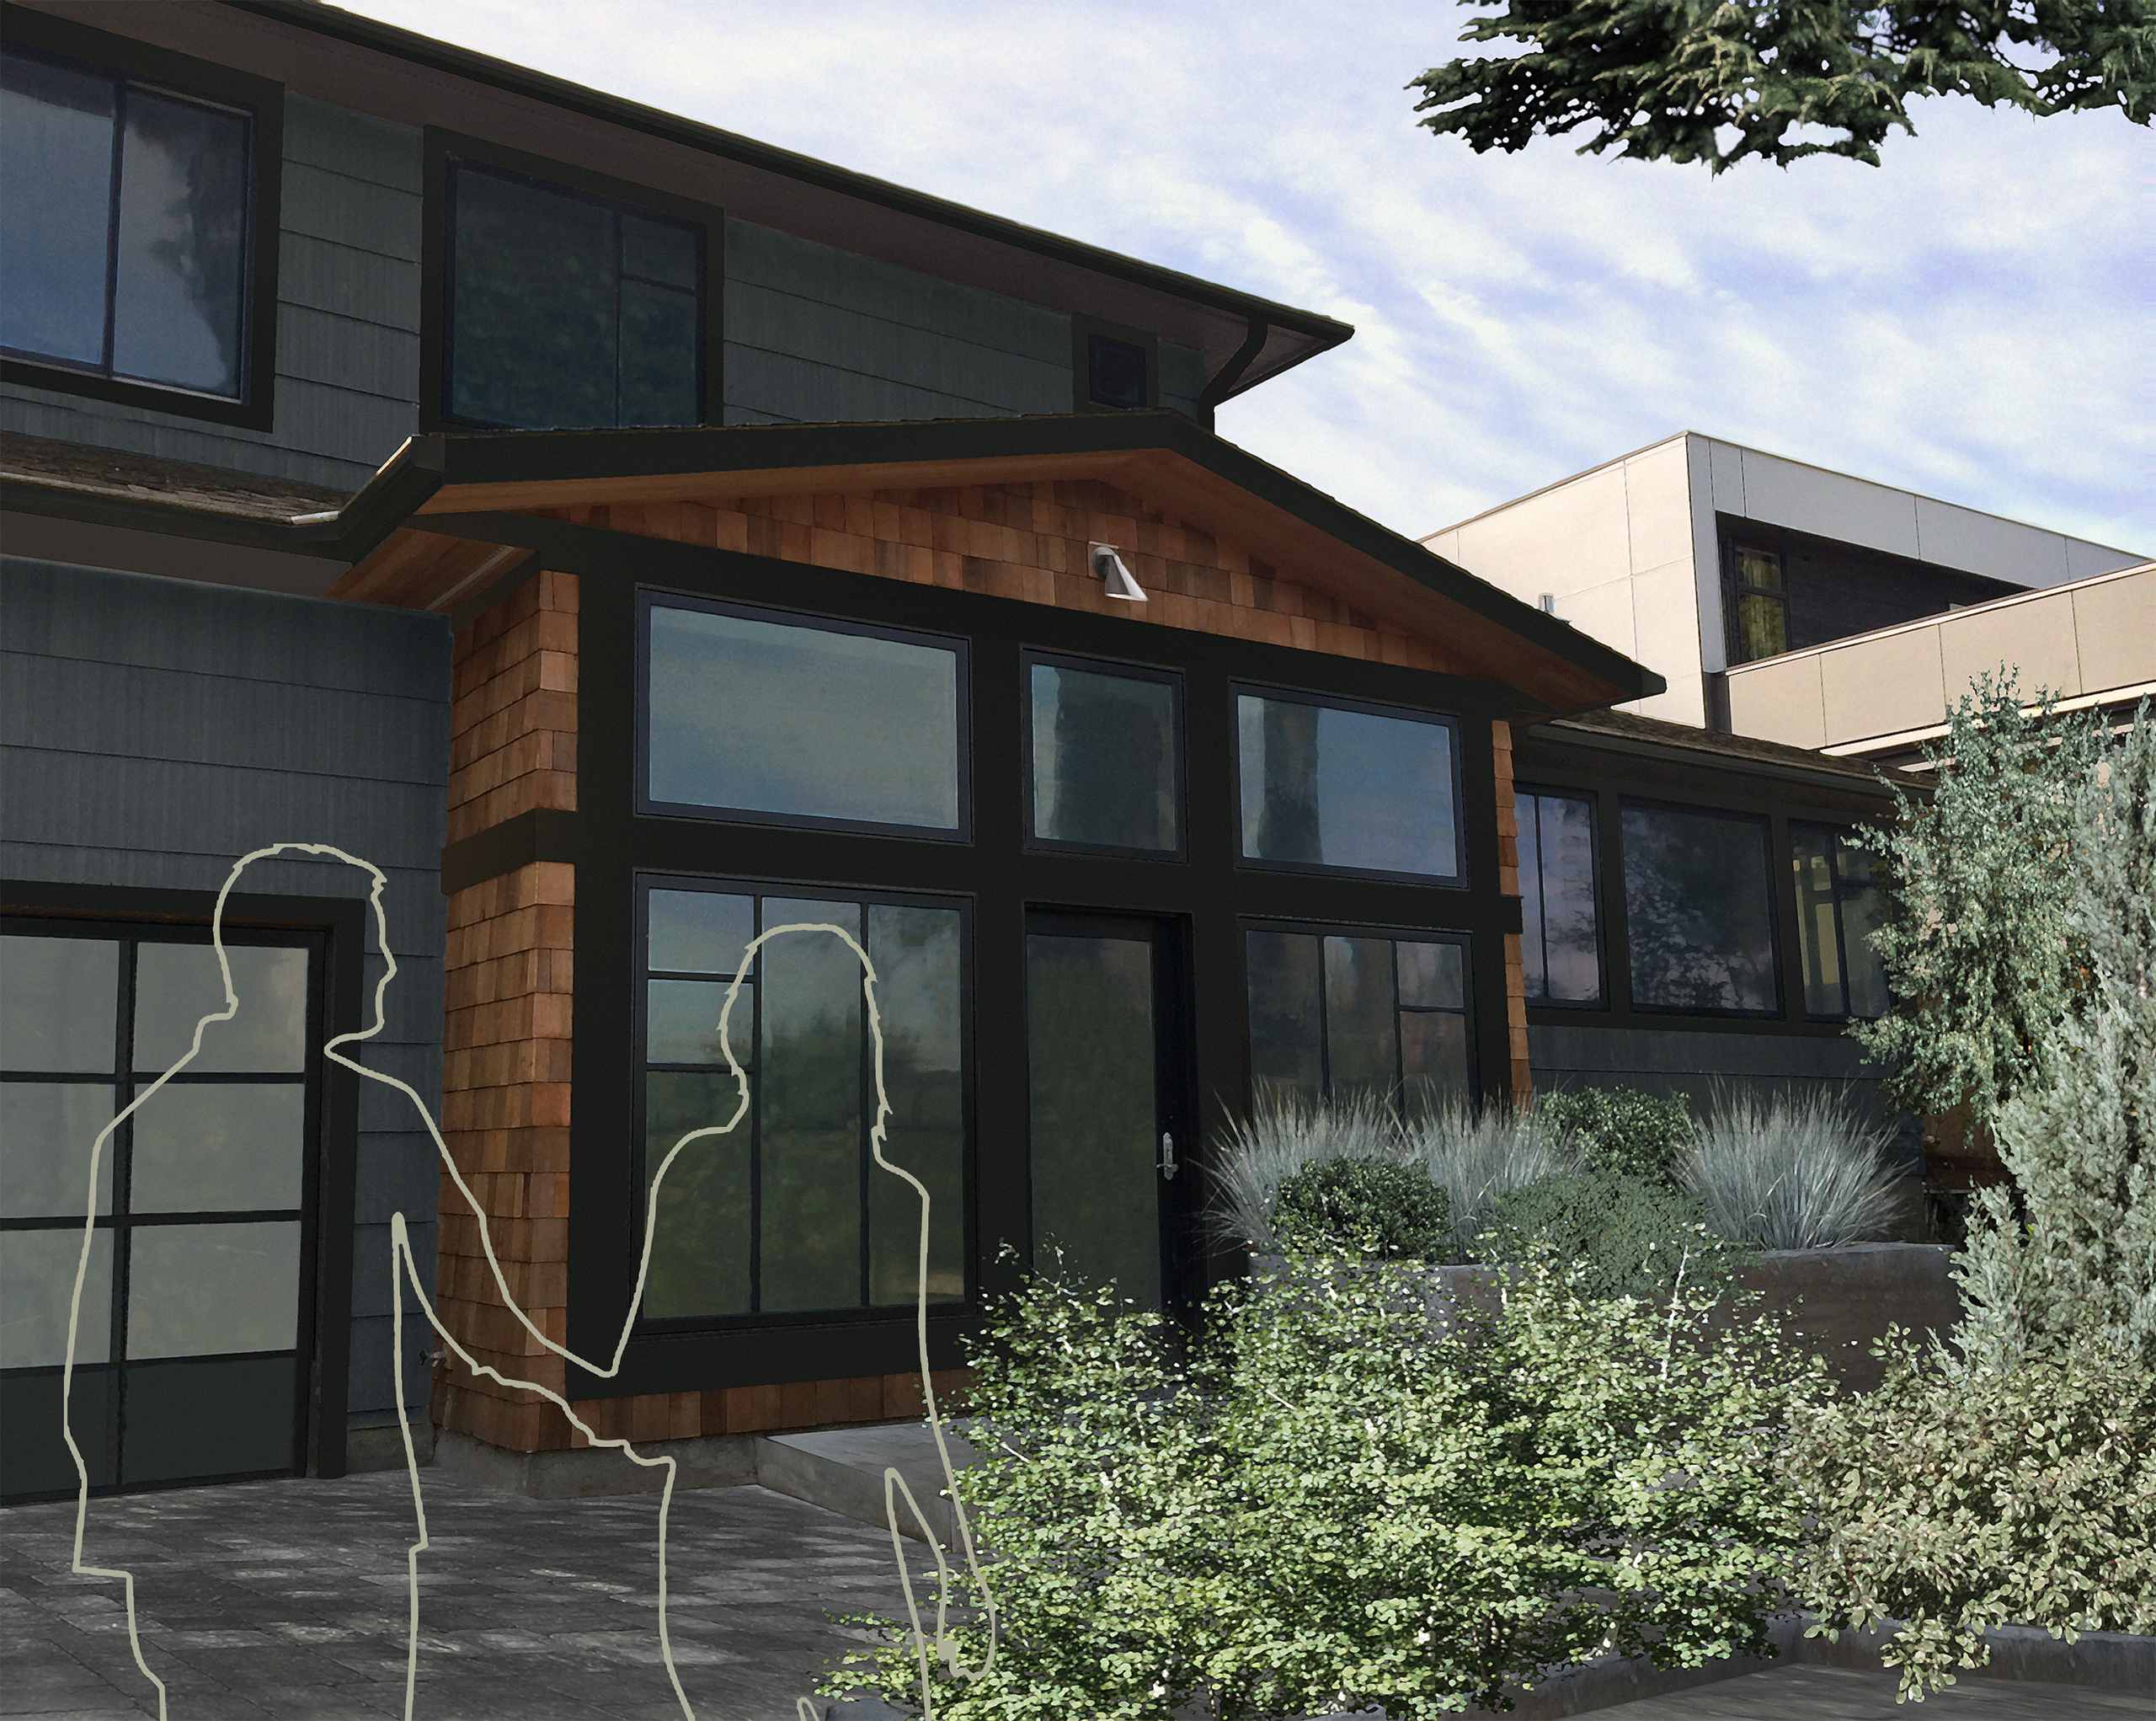 92nd Street Remodel & Addition: Early Design Sketches - New Entry Addition: Rendered